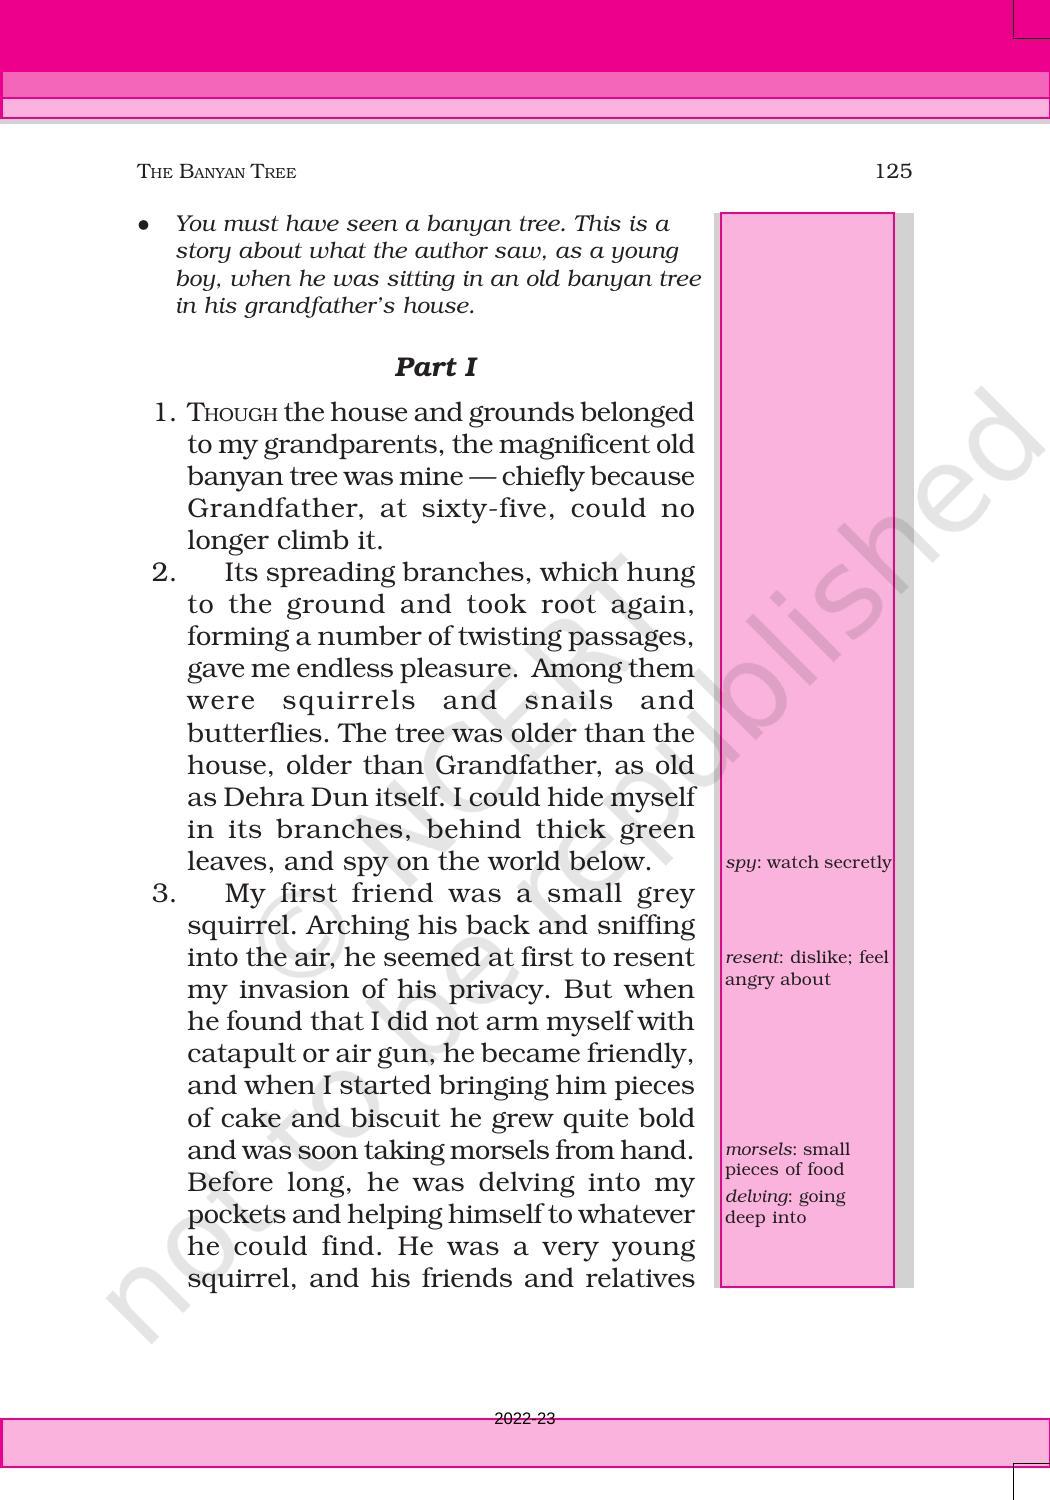 NCERT Book for Class 6 English(Honeysuckle) : Chapter 10-The Banyan Tree - Page 2